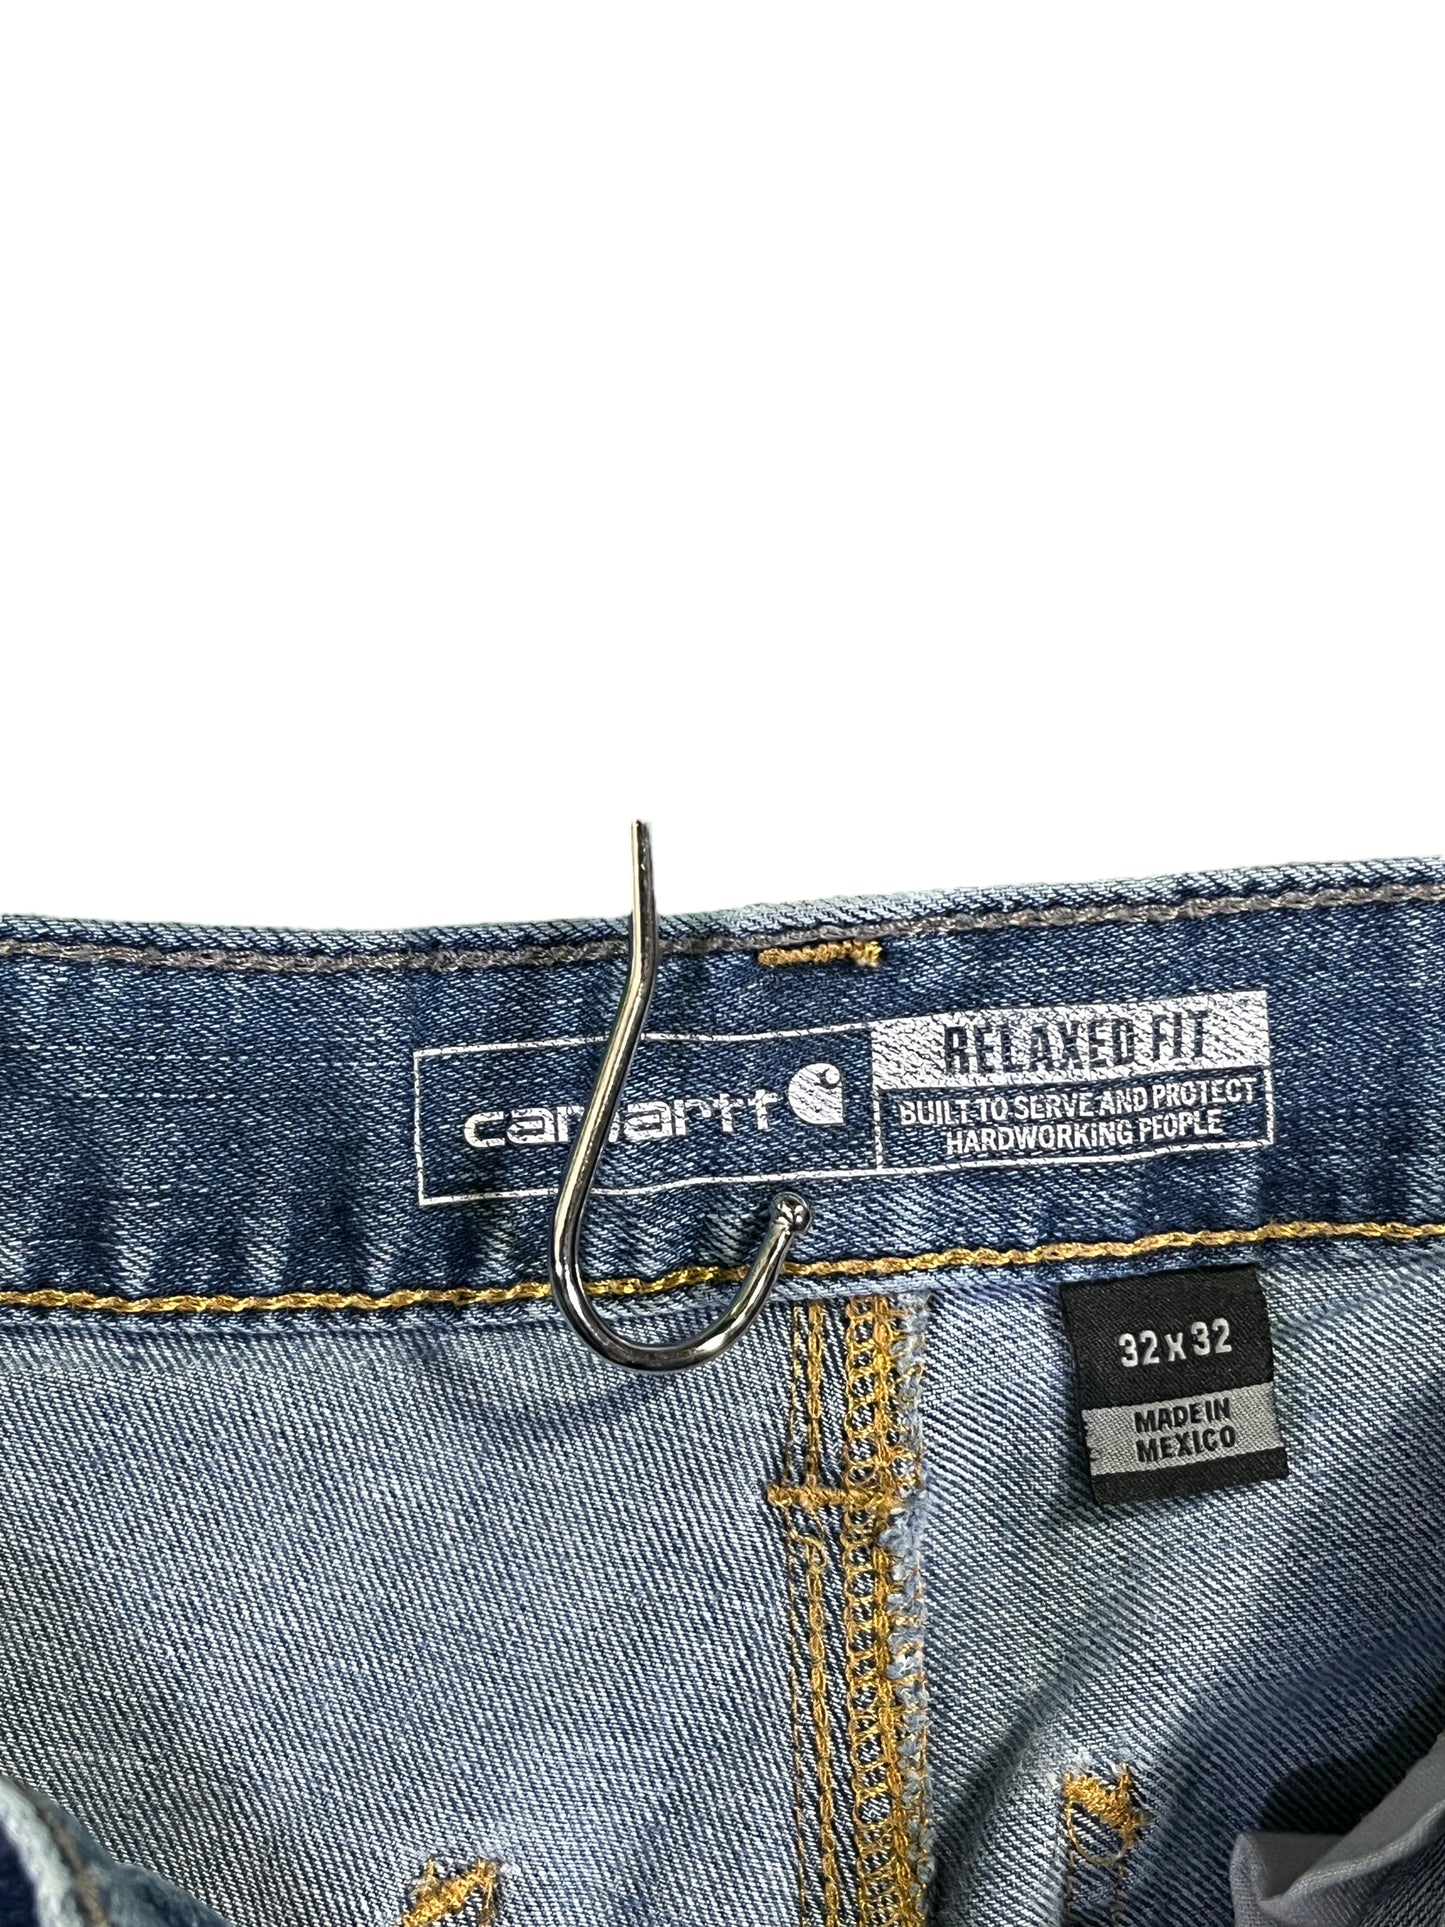 Carhartt Relaxed Fit Double Knee Dungaree Denim Jeans Size 32x32